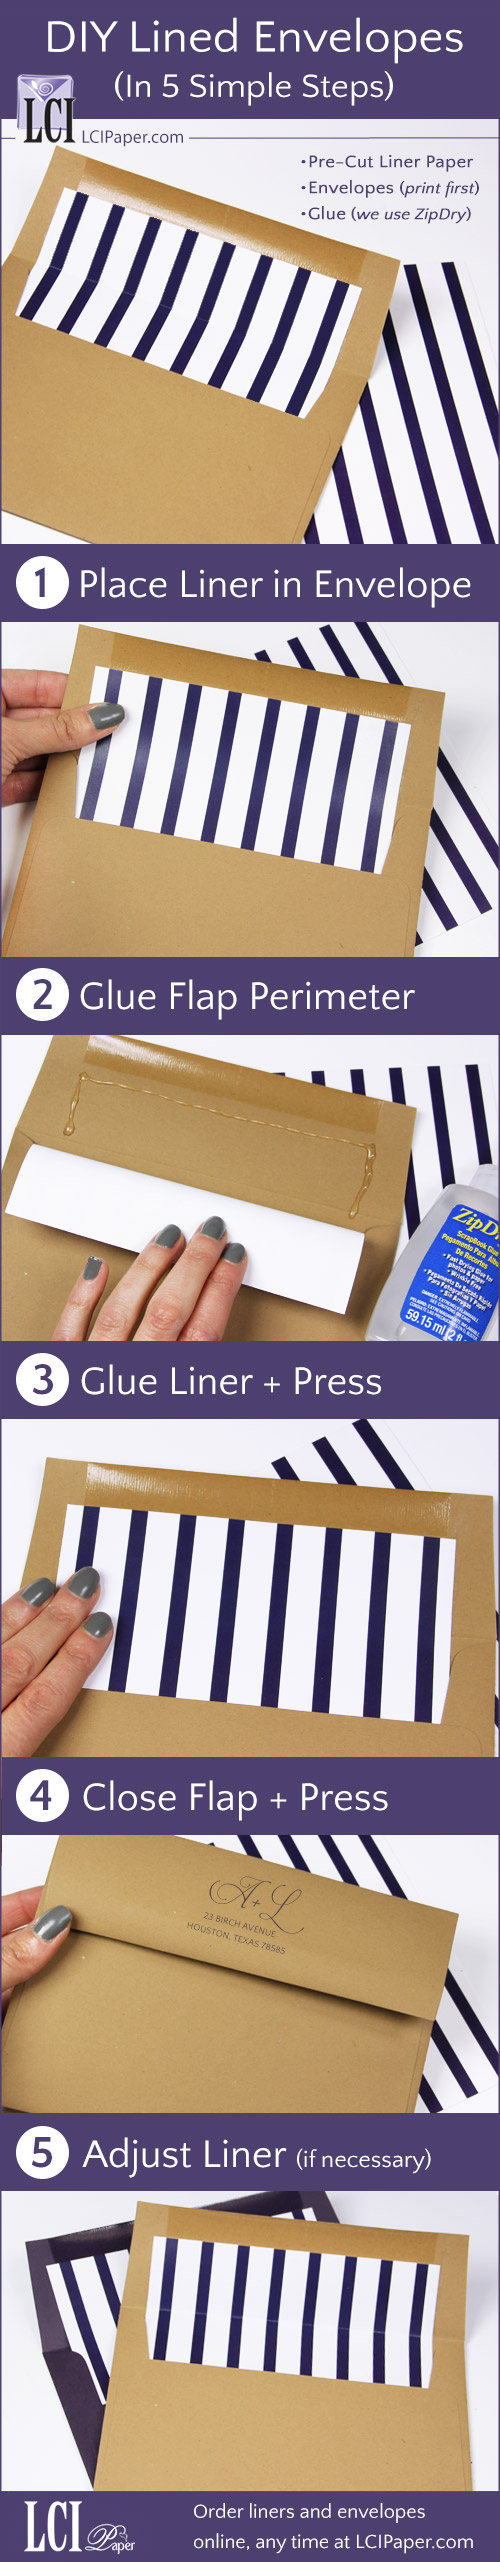 Infographic - line your own envelopes in 5 steps using LCI's printed pre-cut envelope liners